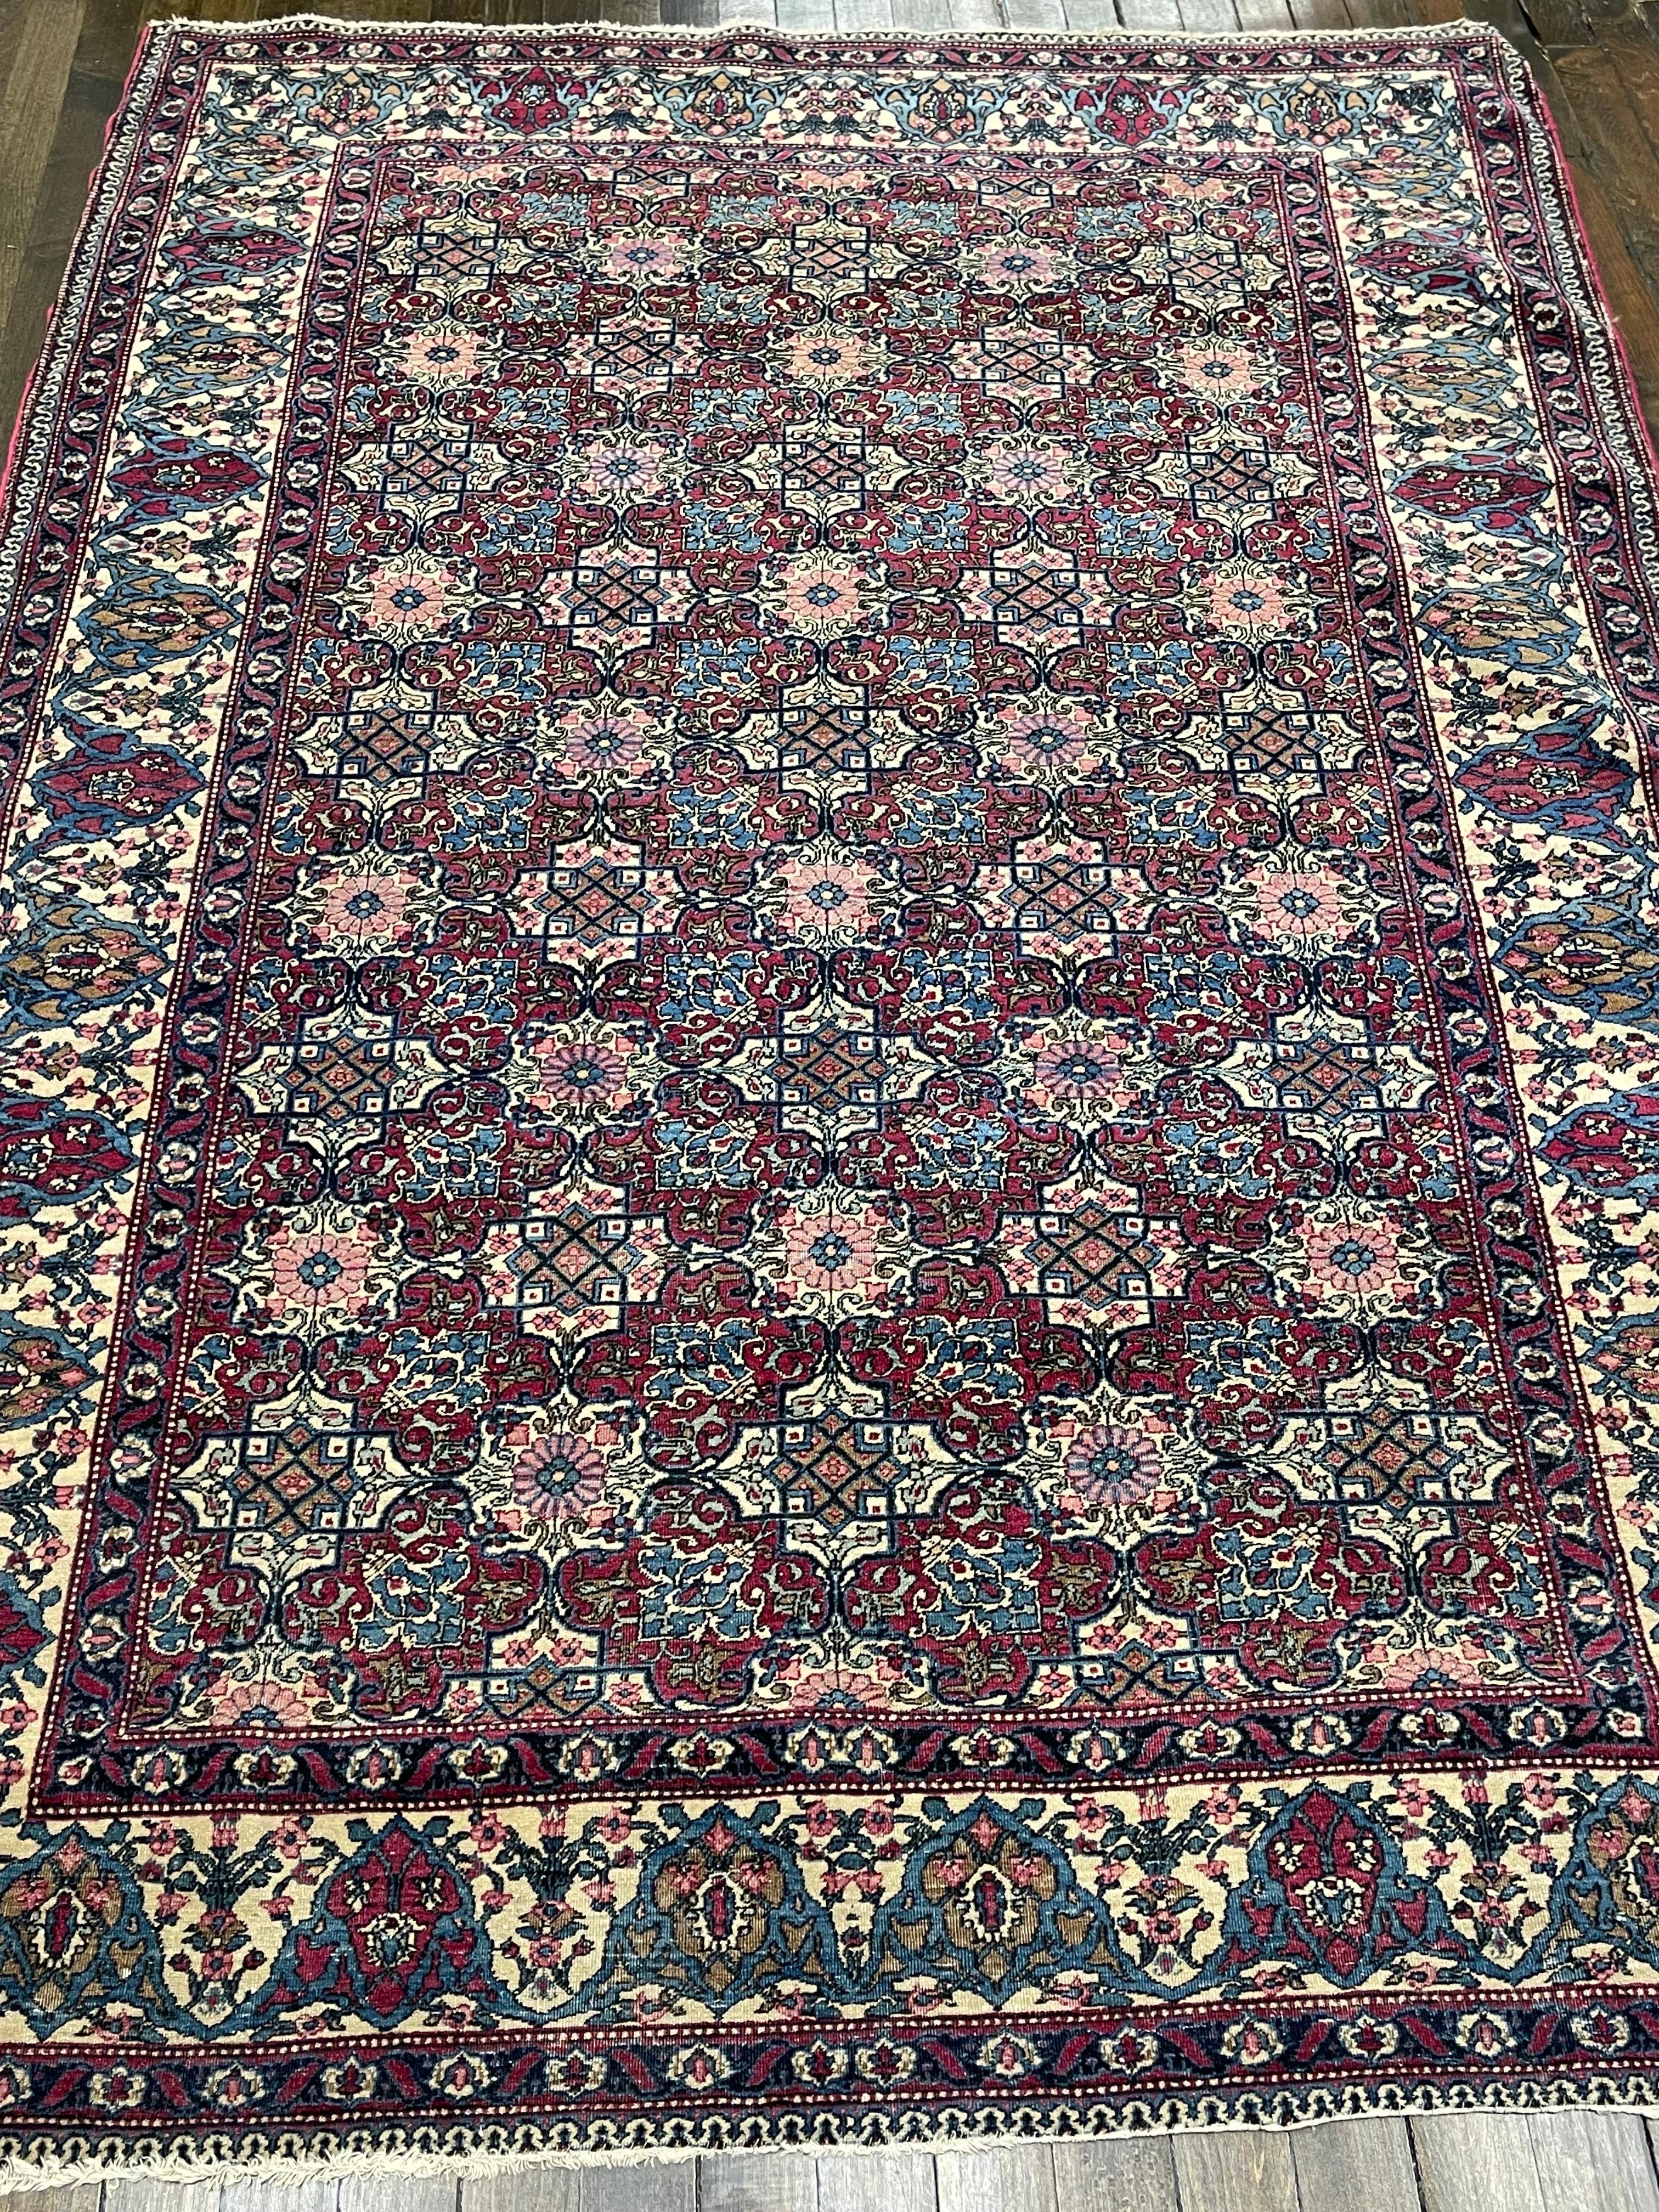 Extremely fine hand knotted, this rug is made in Tehran. The modern capital of Iran, the city of Tehran does not hold a long tradition of carpet weaving. However some of the finest hand made carpets were made in private houses by weaver/artists from